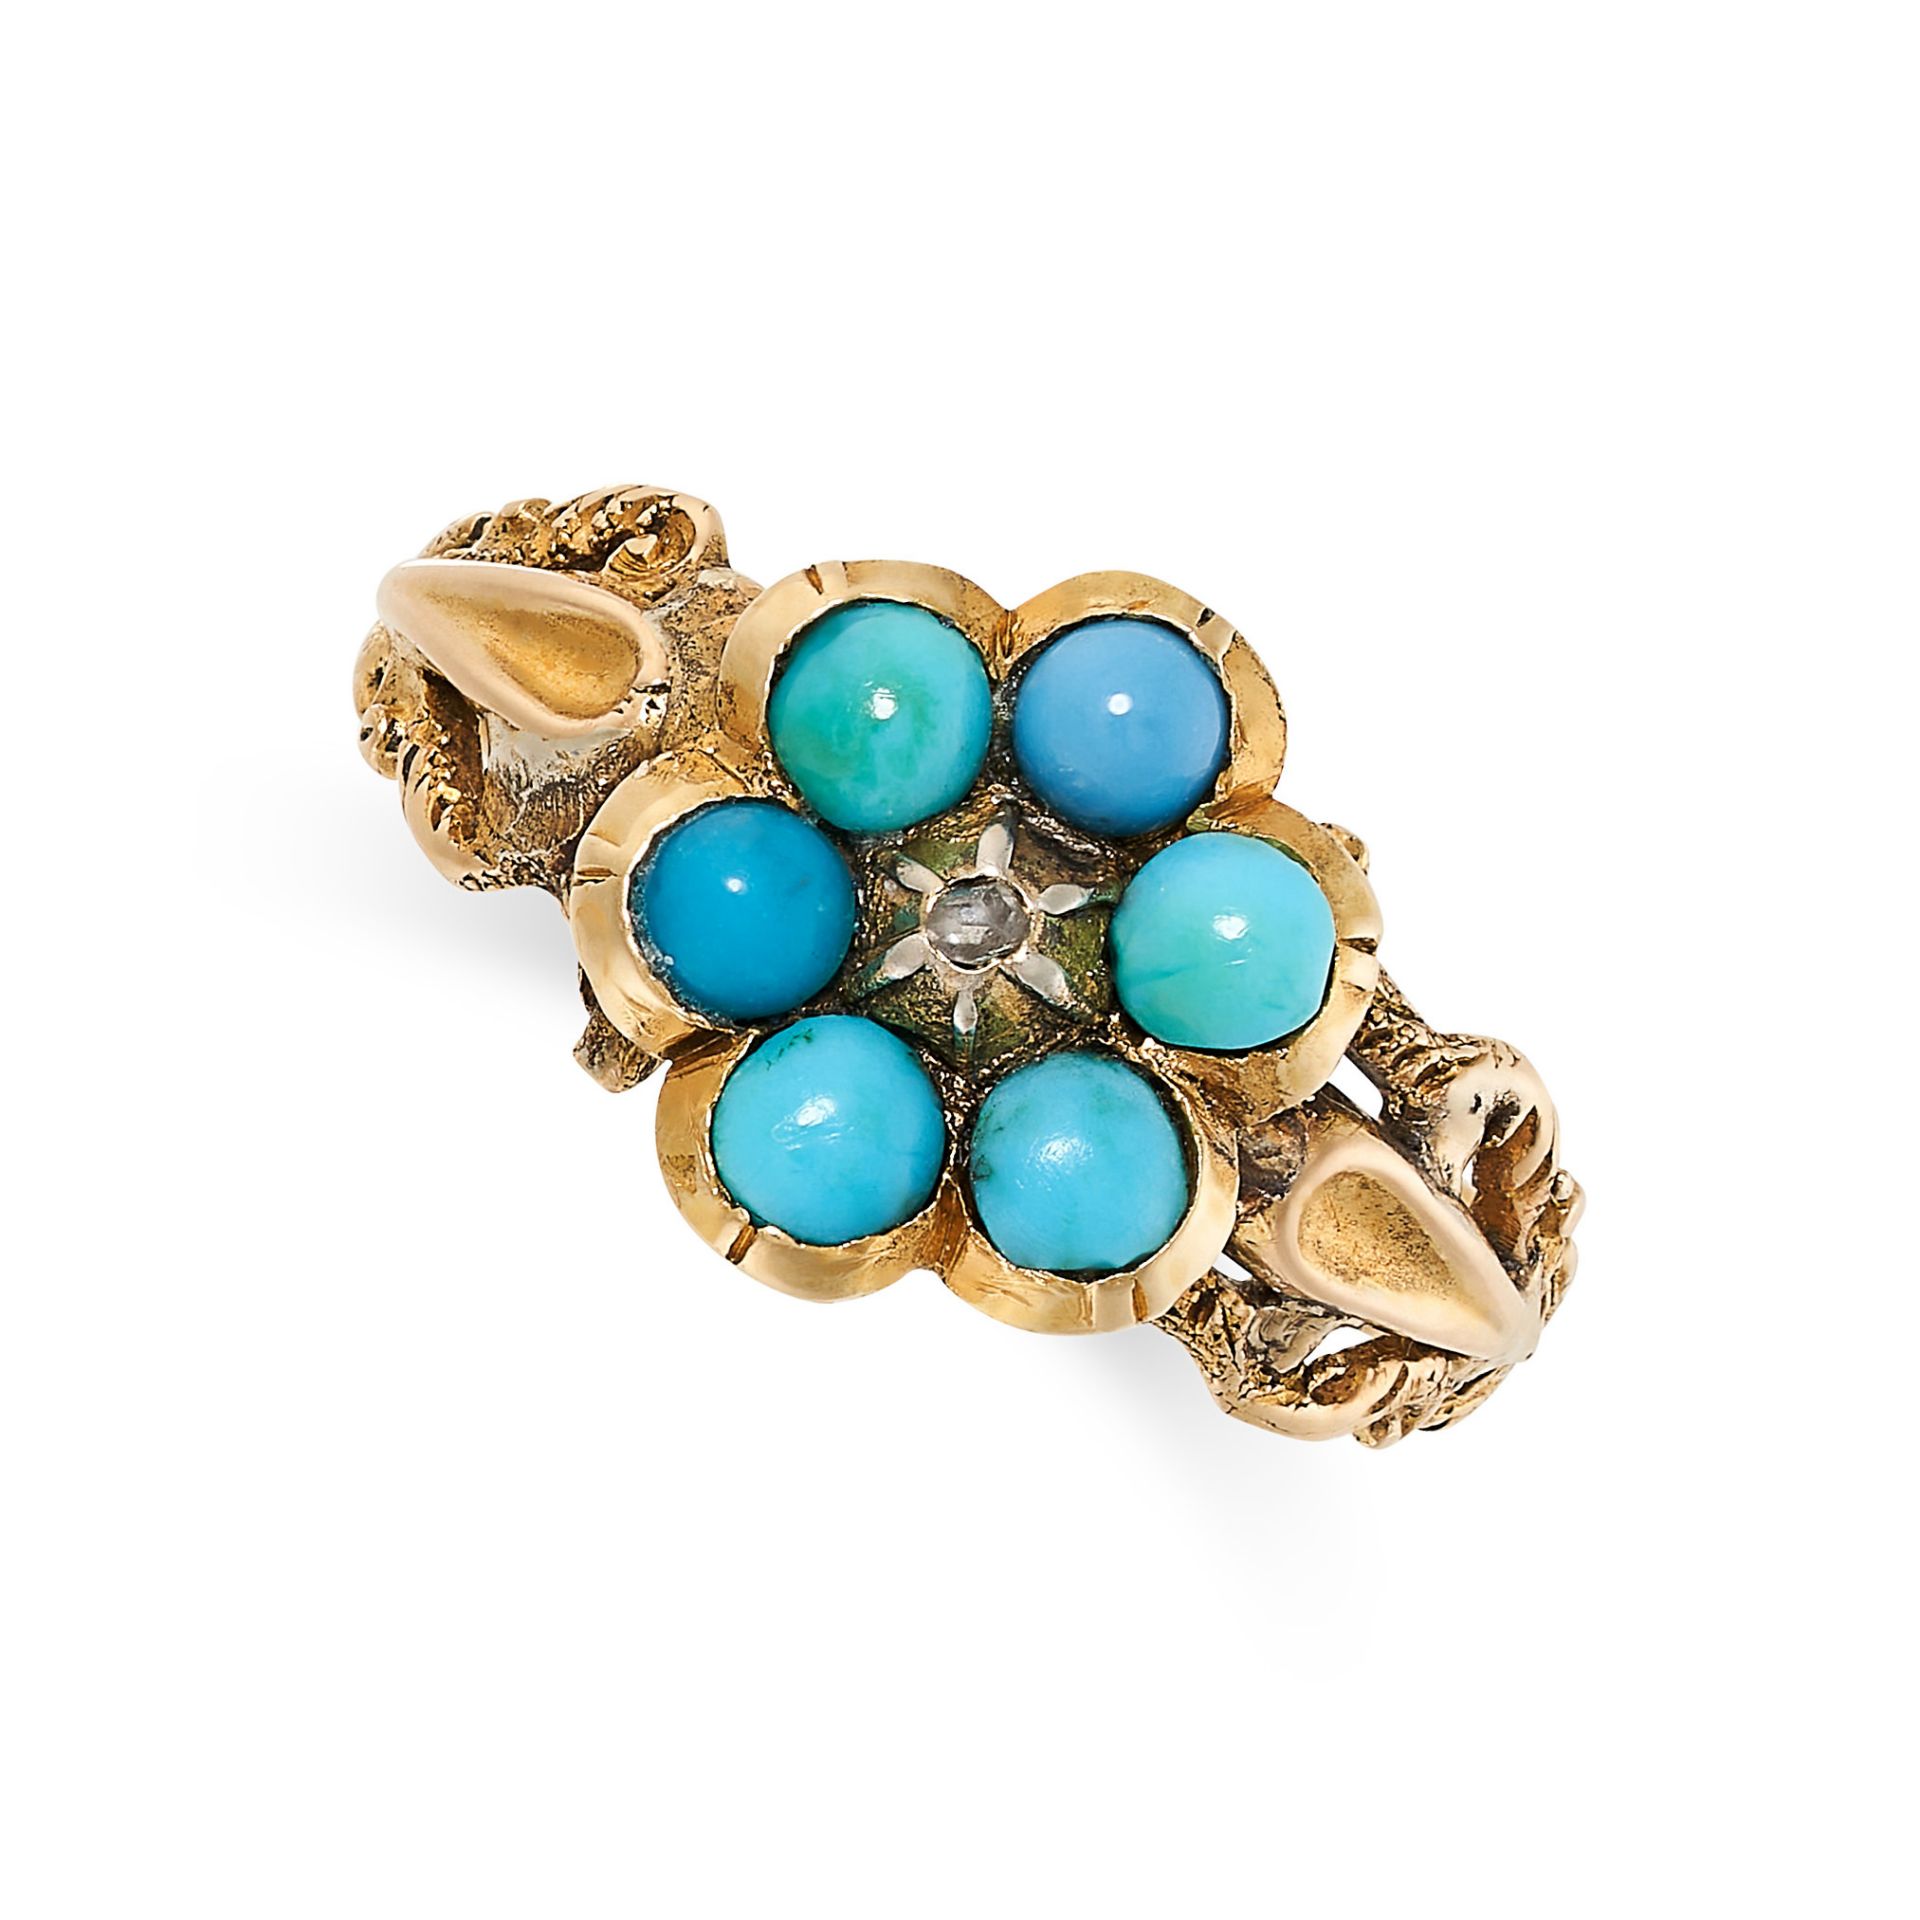 AN ANTIQUE TURQUOISE AND DIAMOND DRESS RING, 19TH CENTURY in high carat yellow gold, designed as a